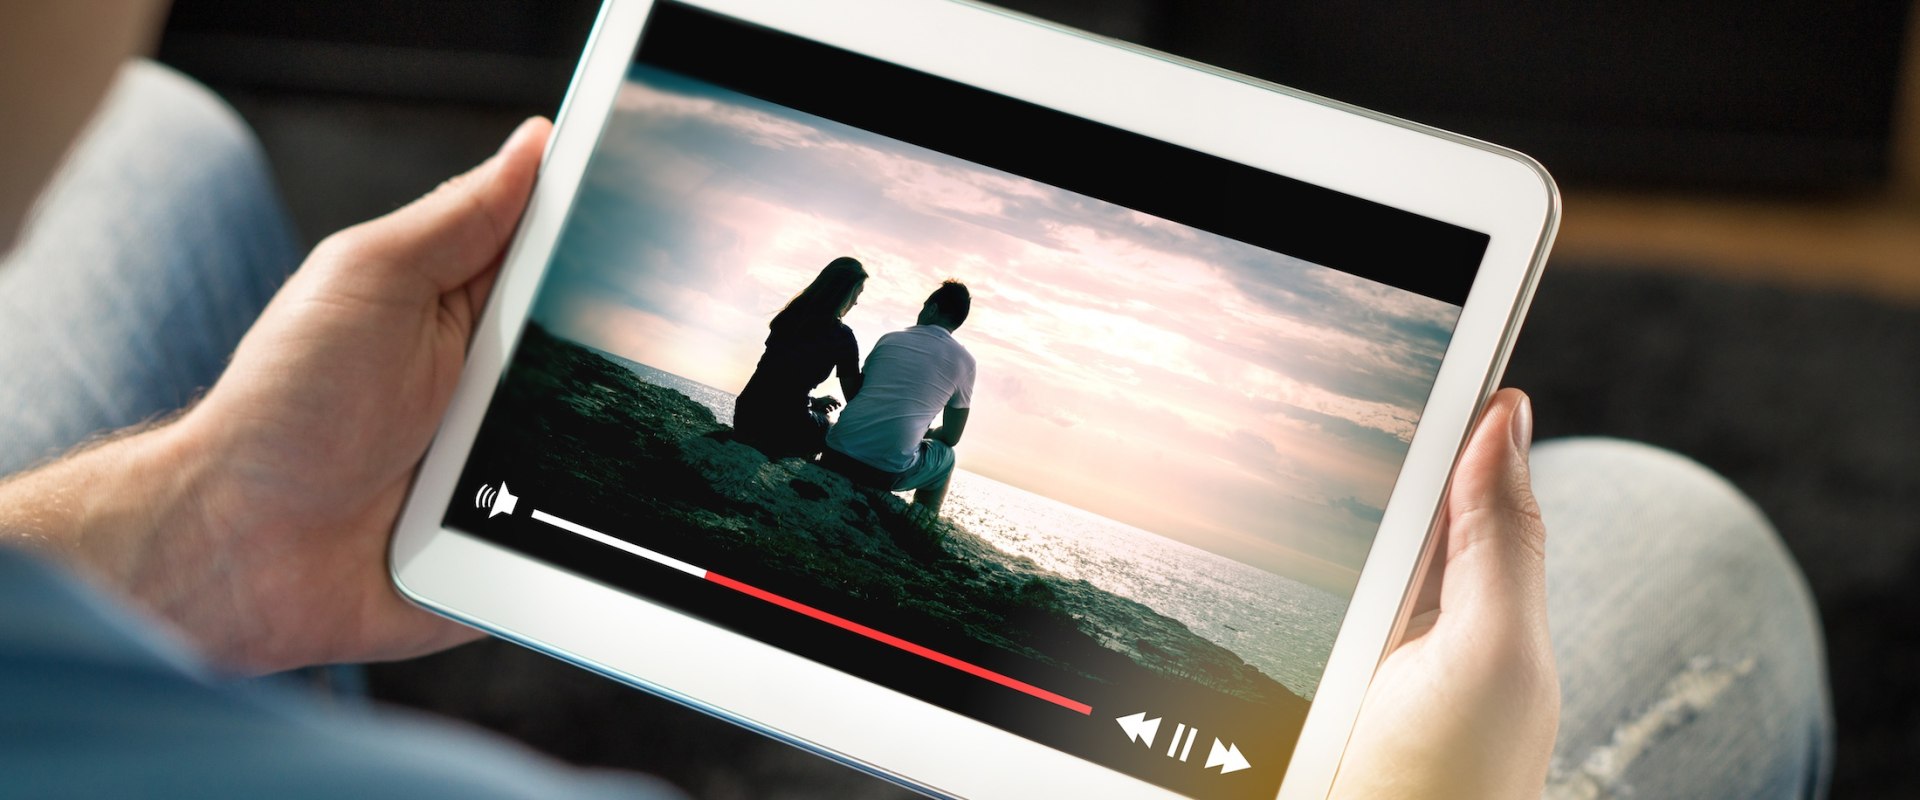 Creating Videos with Your Smartphone or Tablet